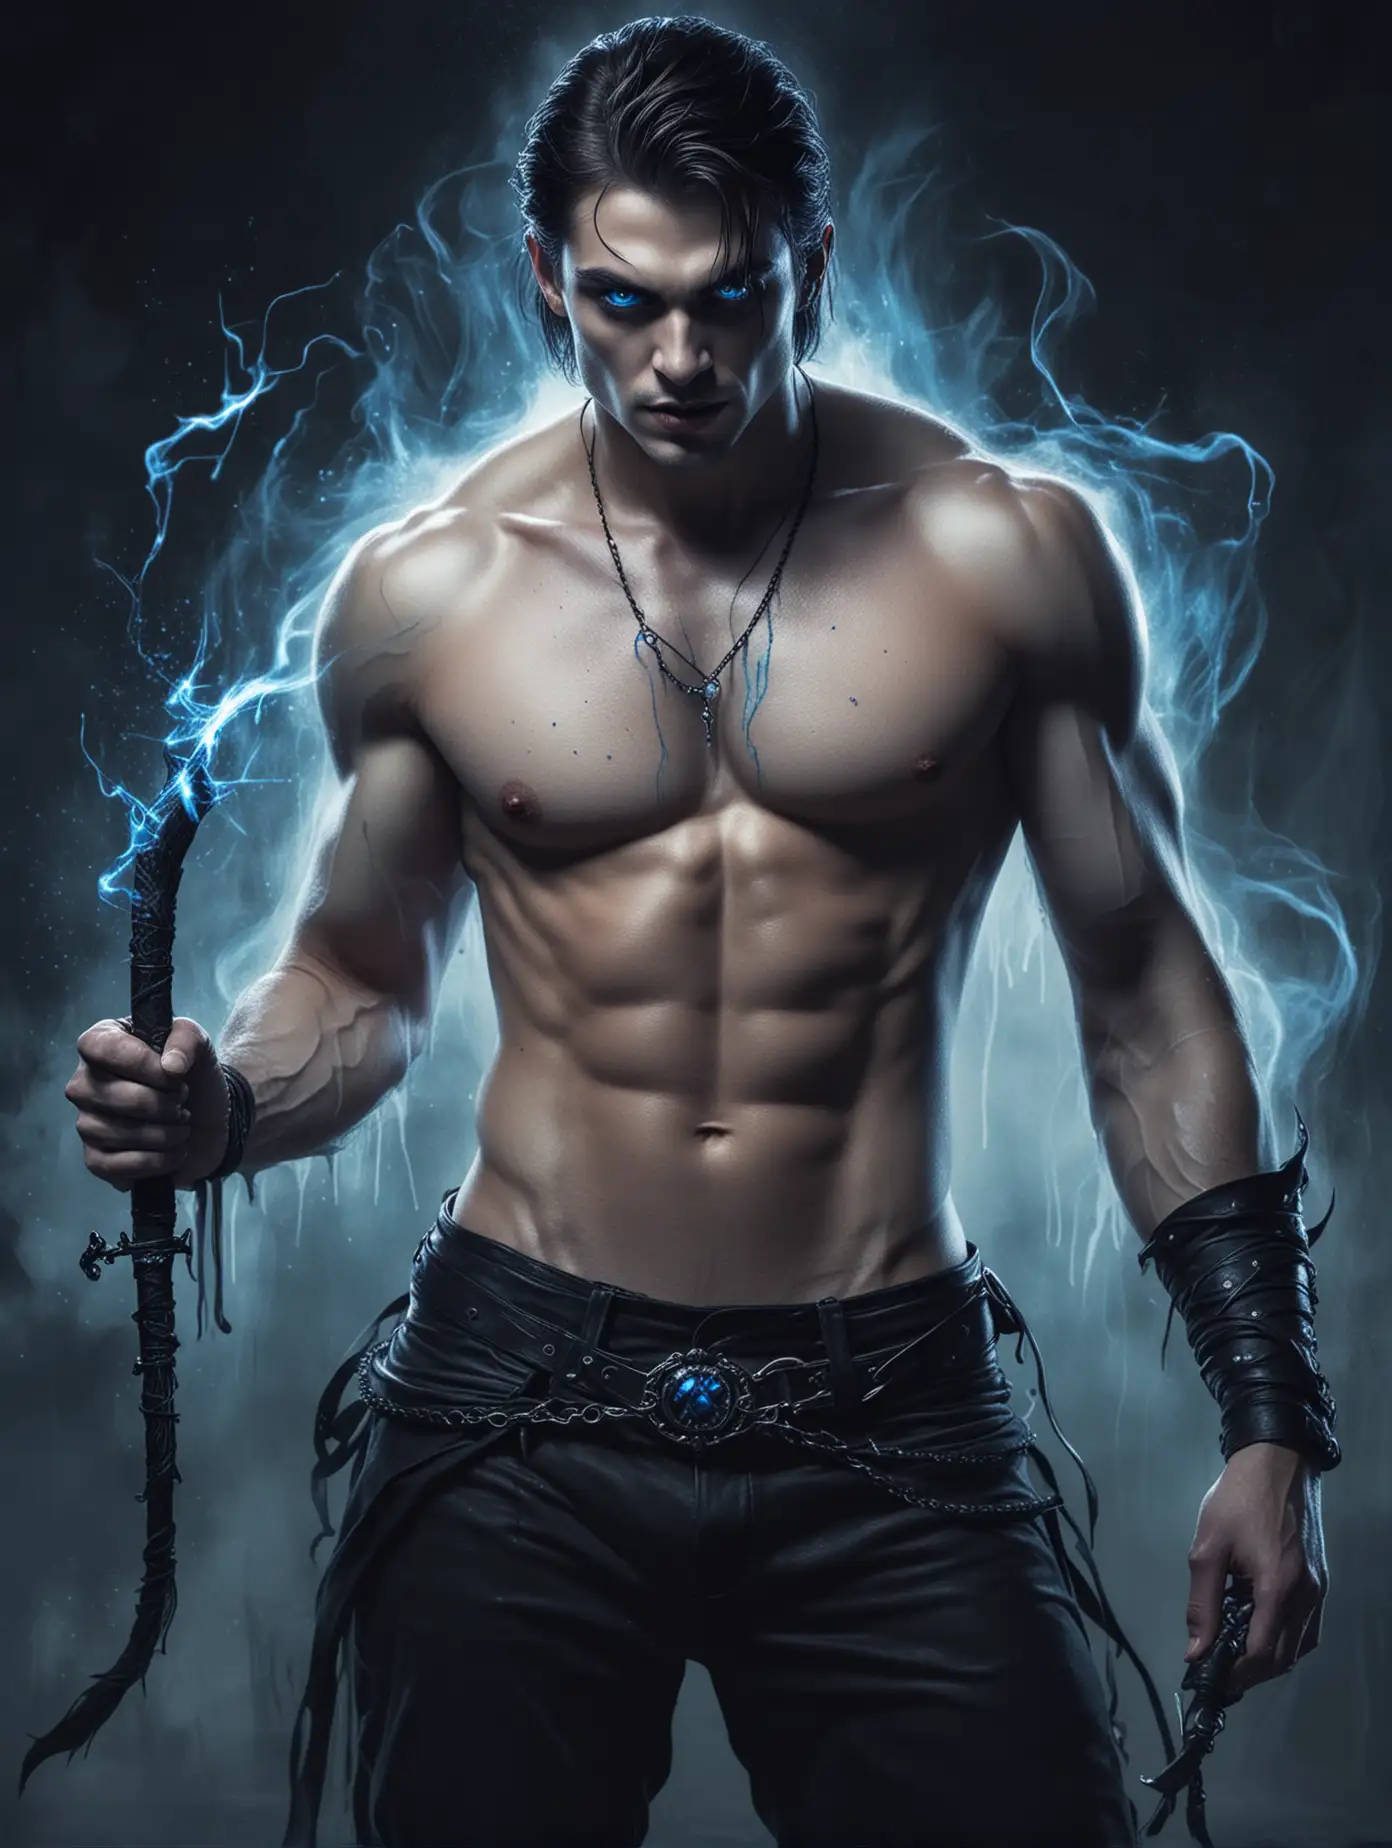 Illustration of a sexy shirtless vampire, with deep blue eyes, fangs, he is holding a whip, blue fog, blue sparks